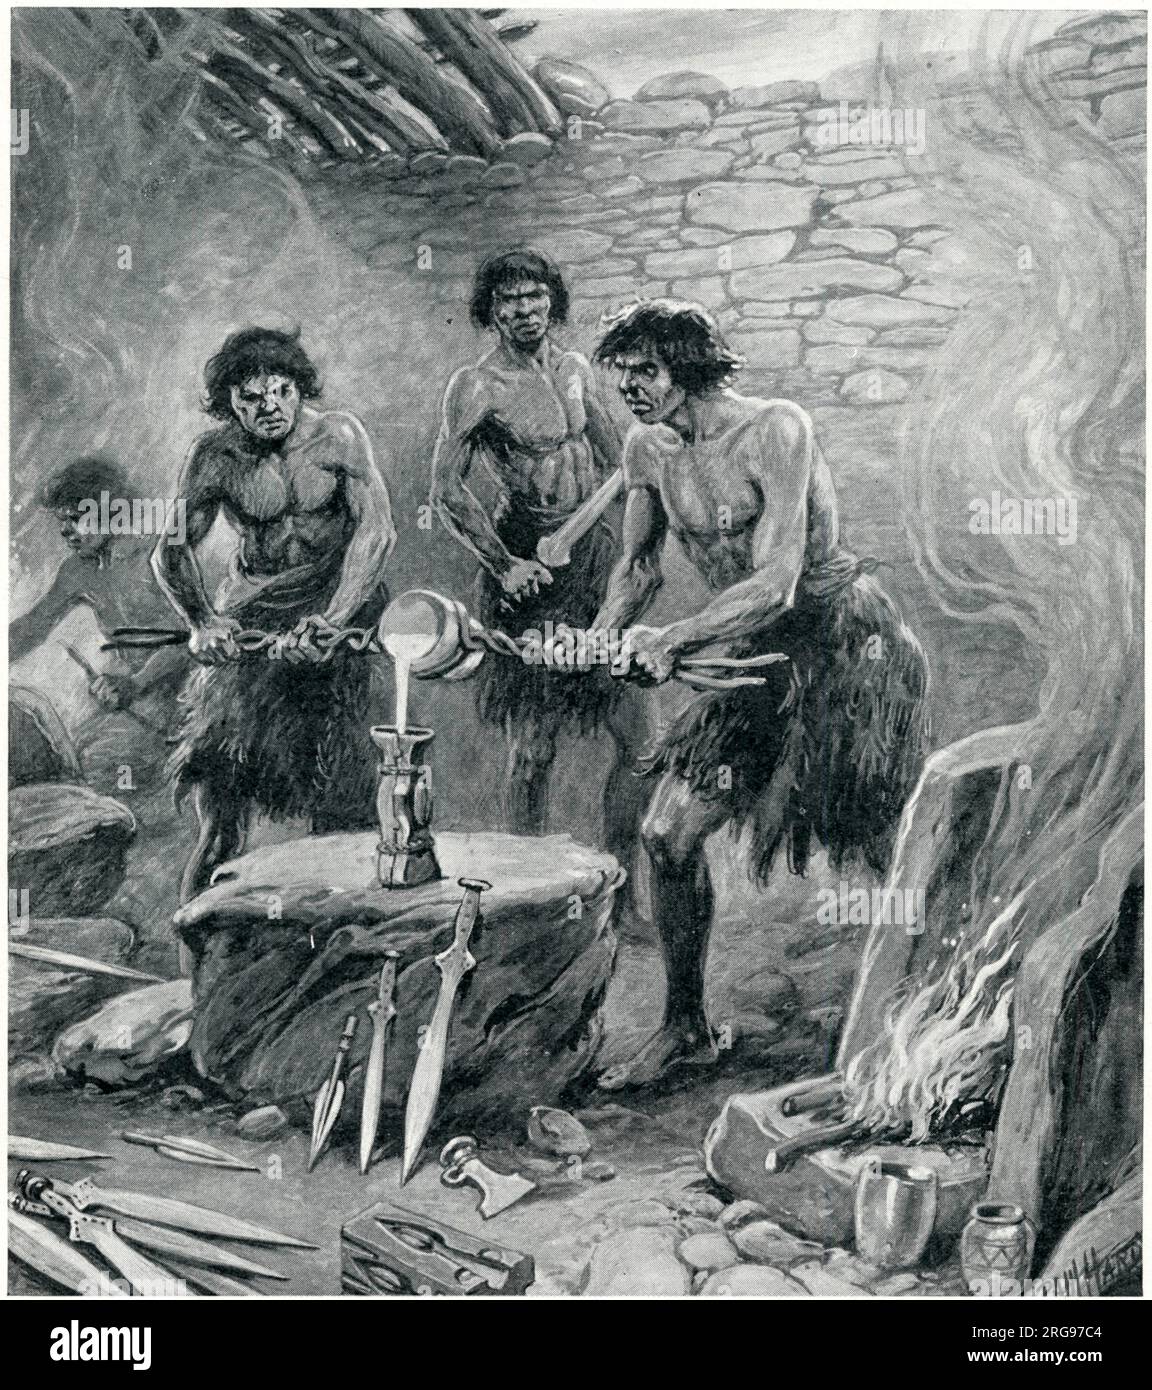 Scene in a Bronze Age foundry, showing men pouring molten metal into a container, and various weapons on display. Stock Photo